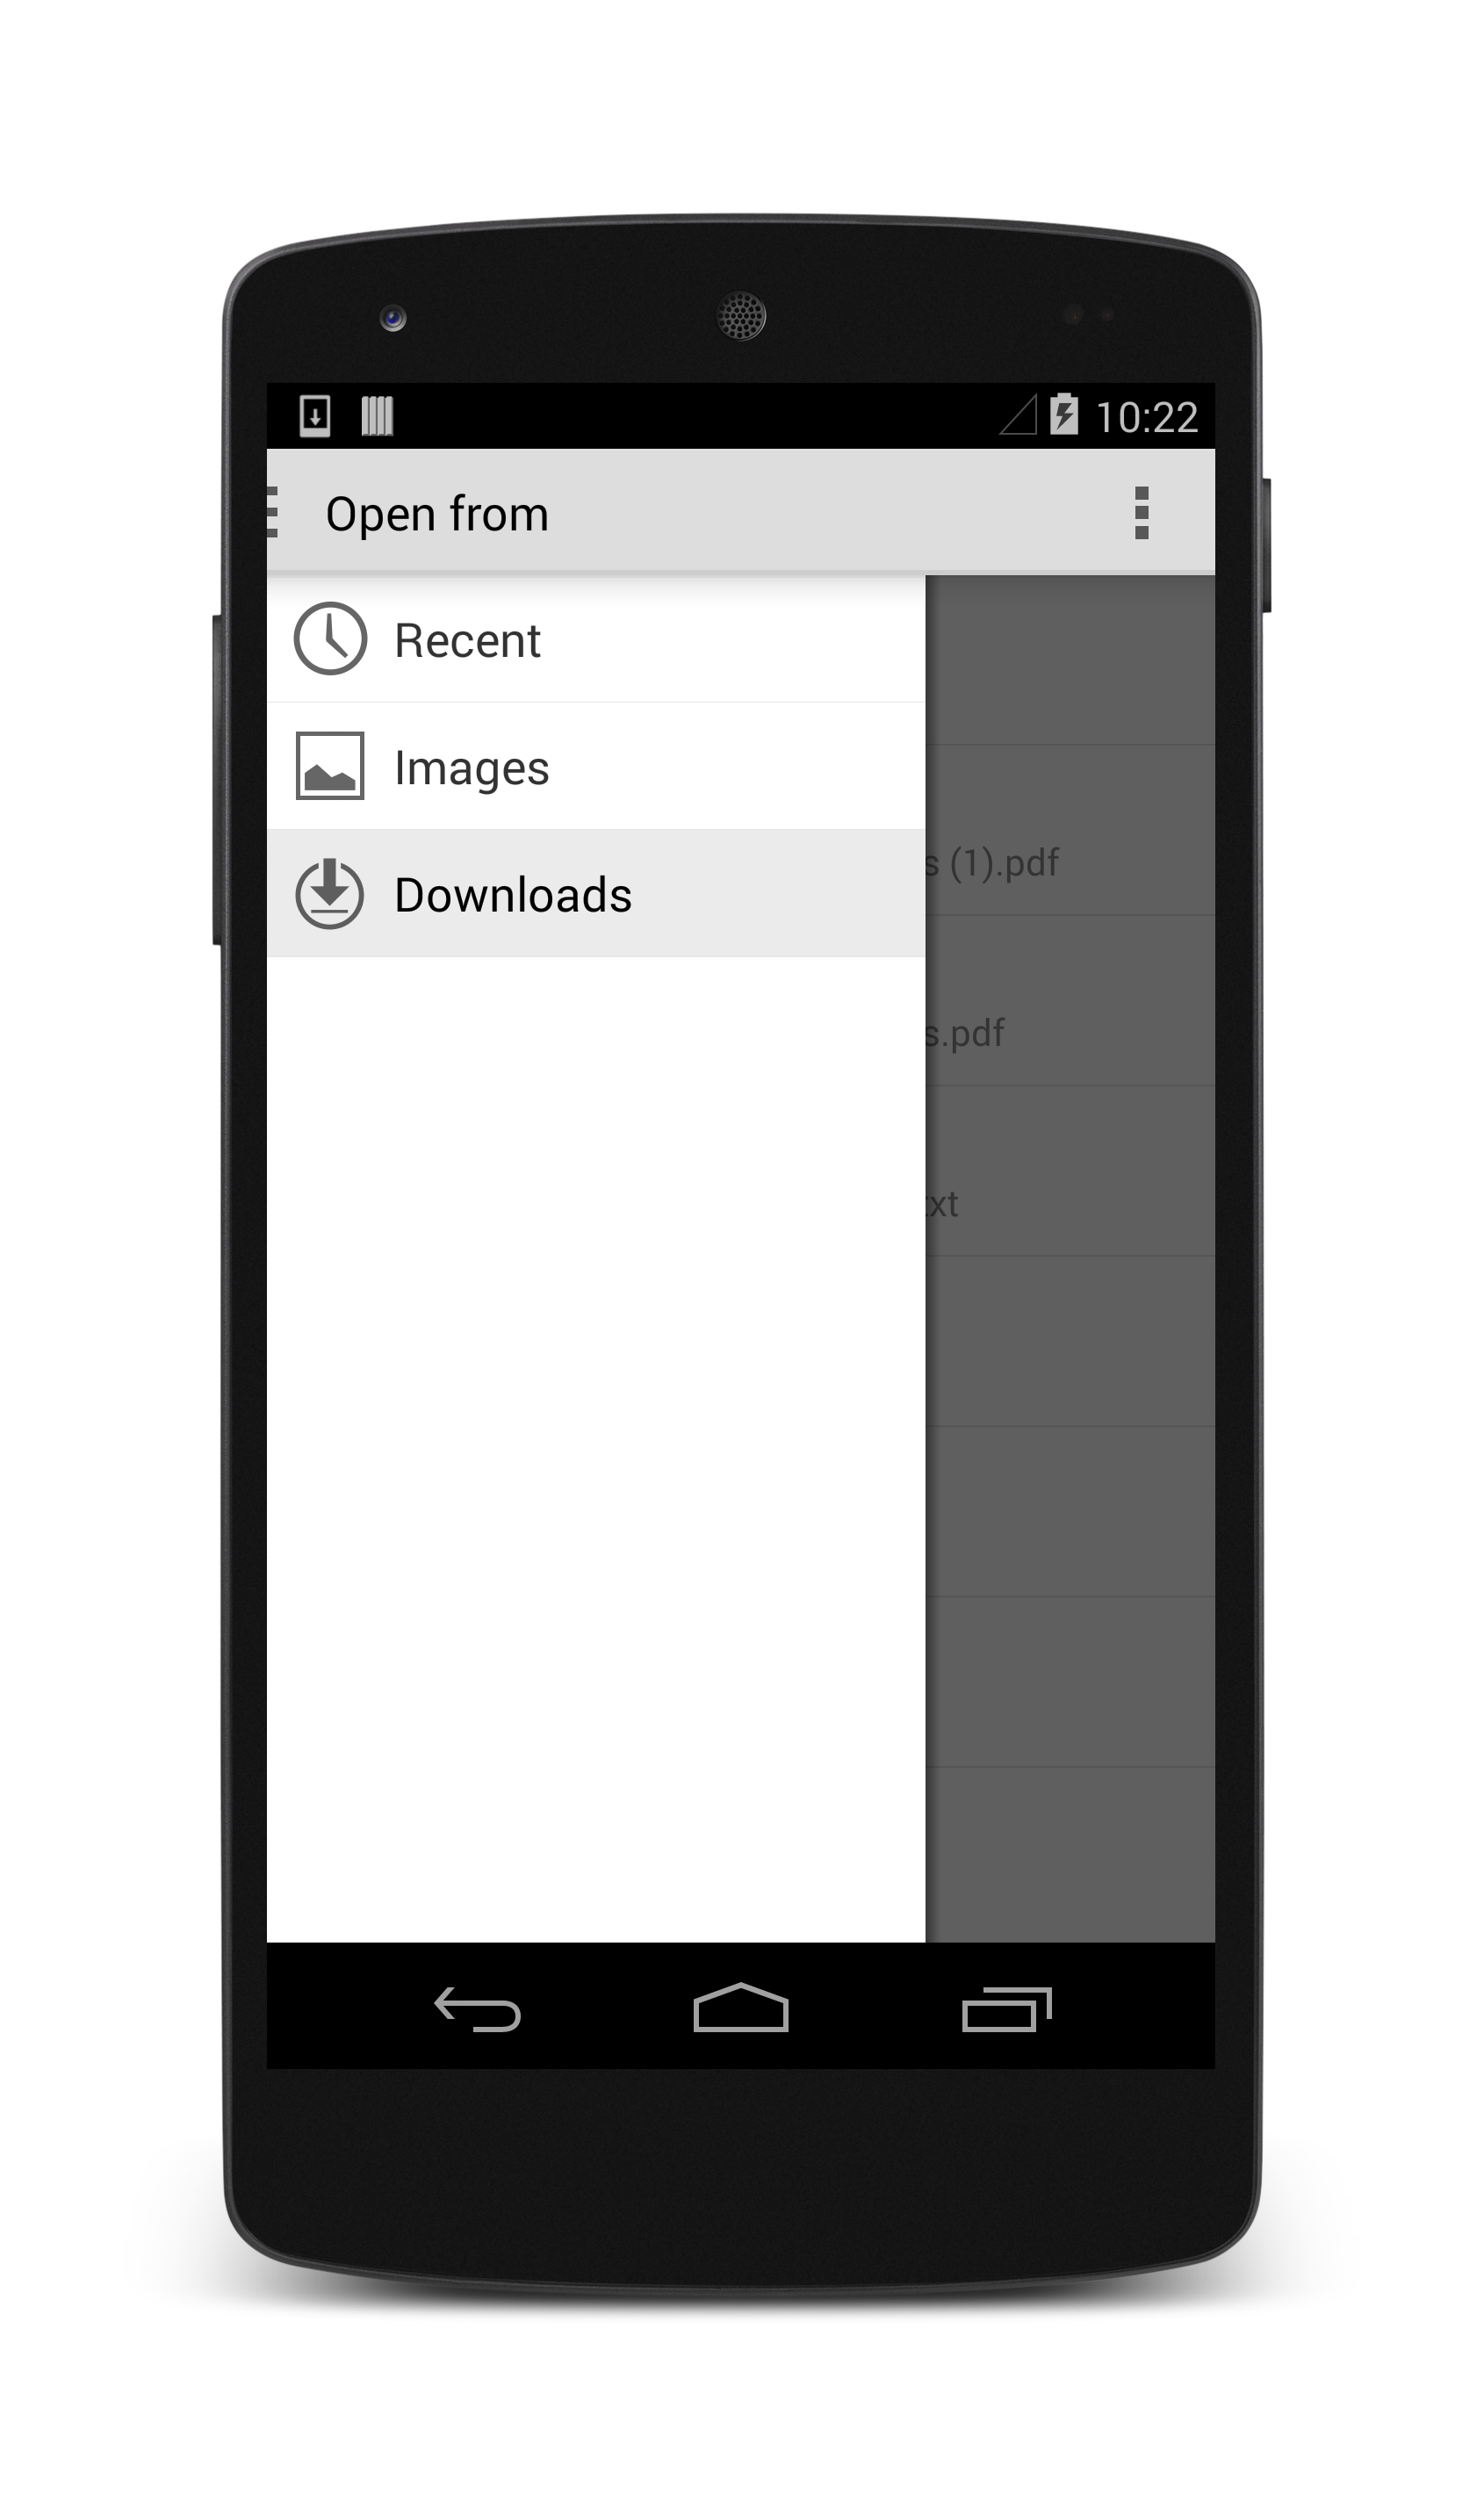 Example screenshot of an app using the Storage Access Framework for browsing to an image